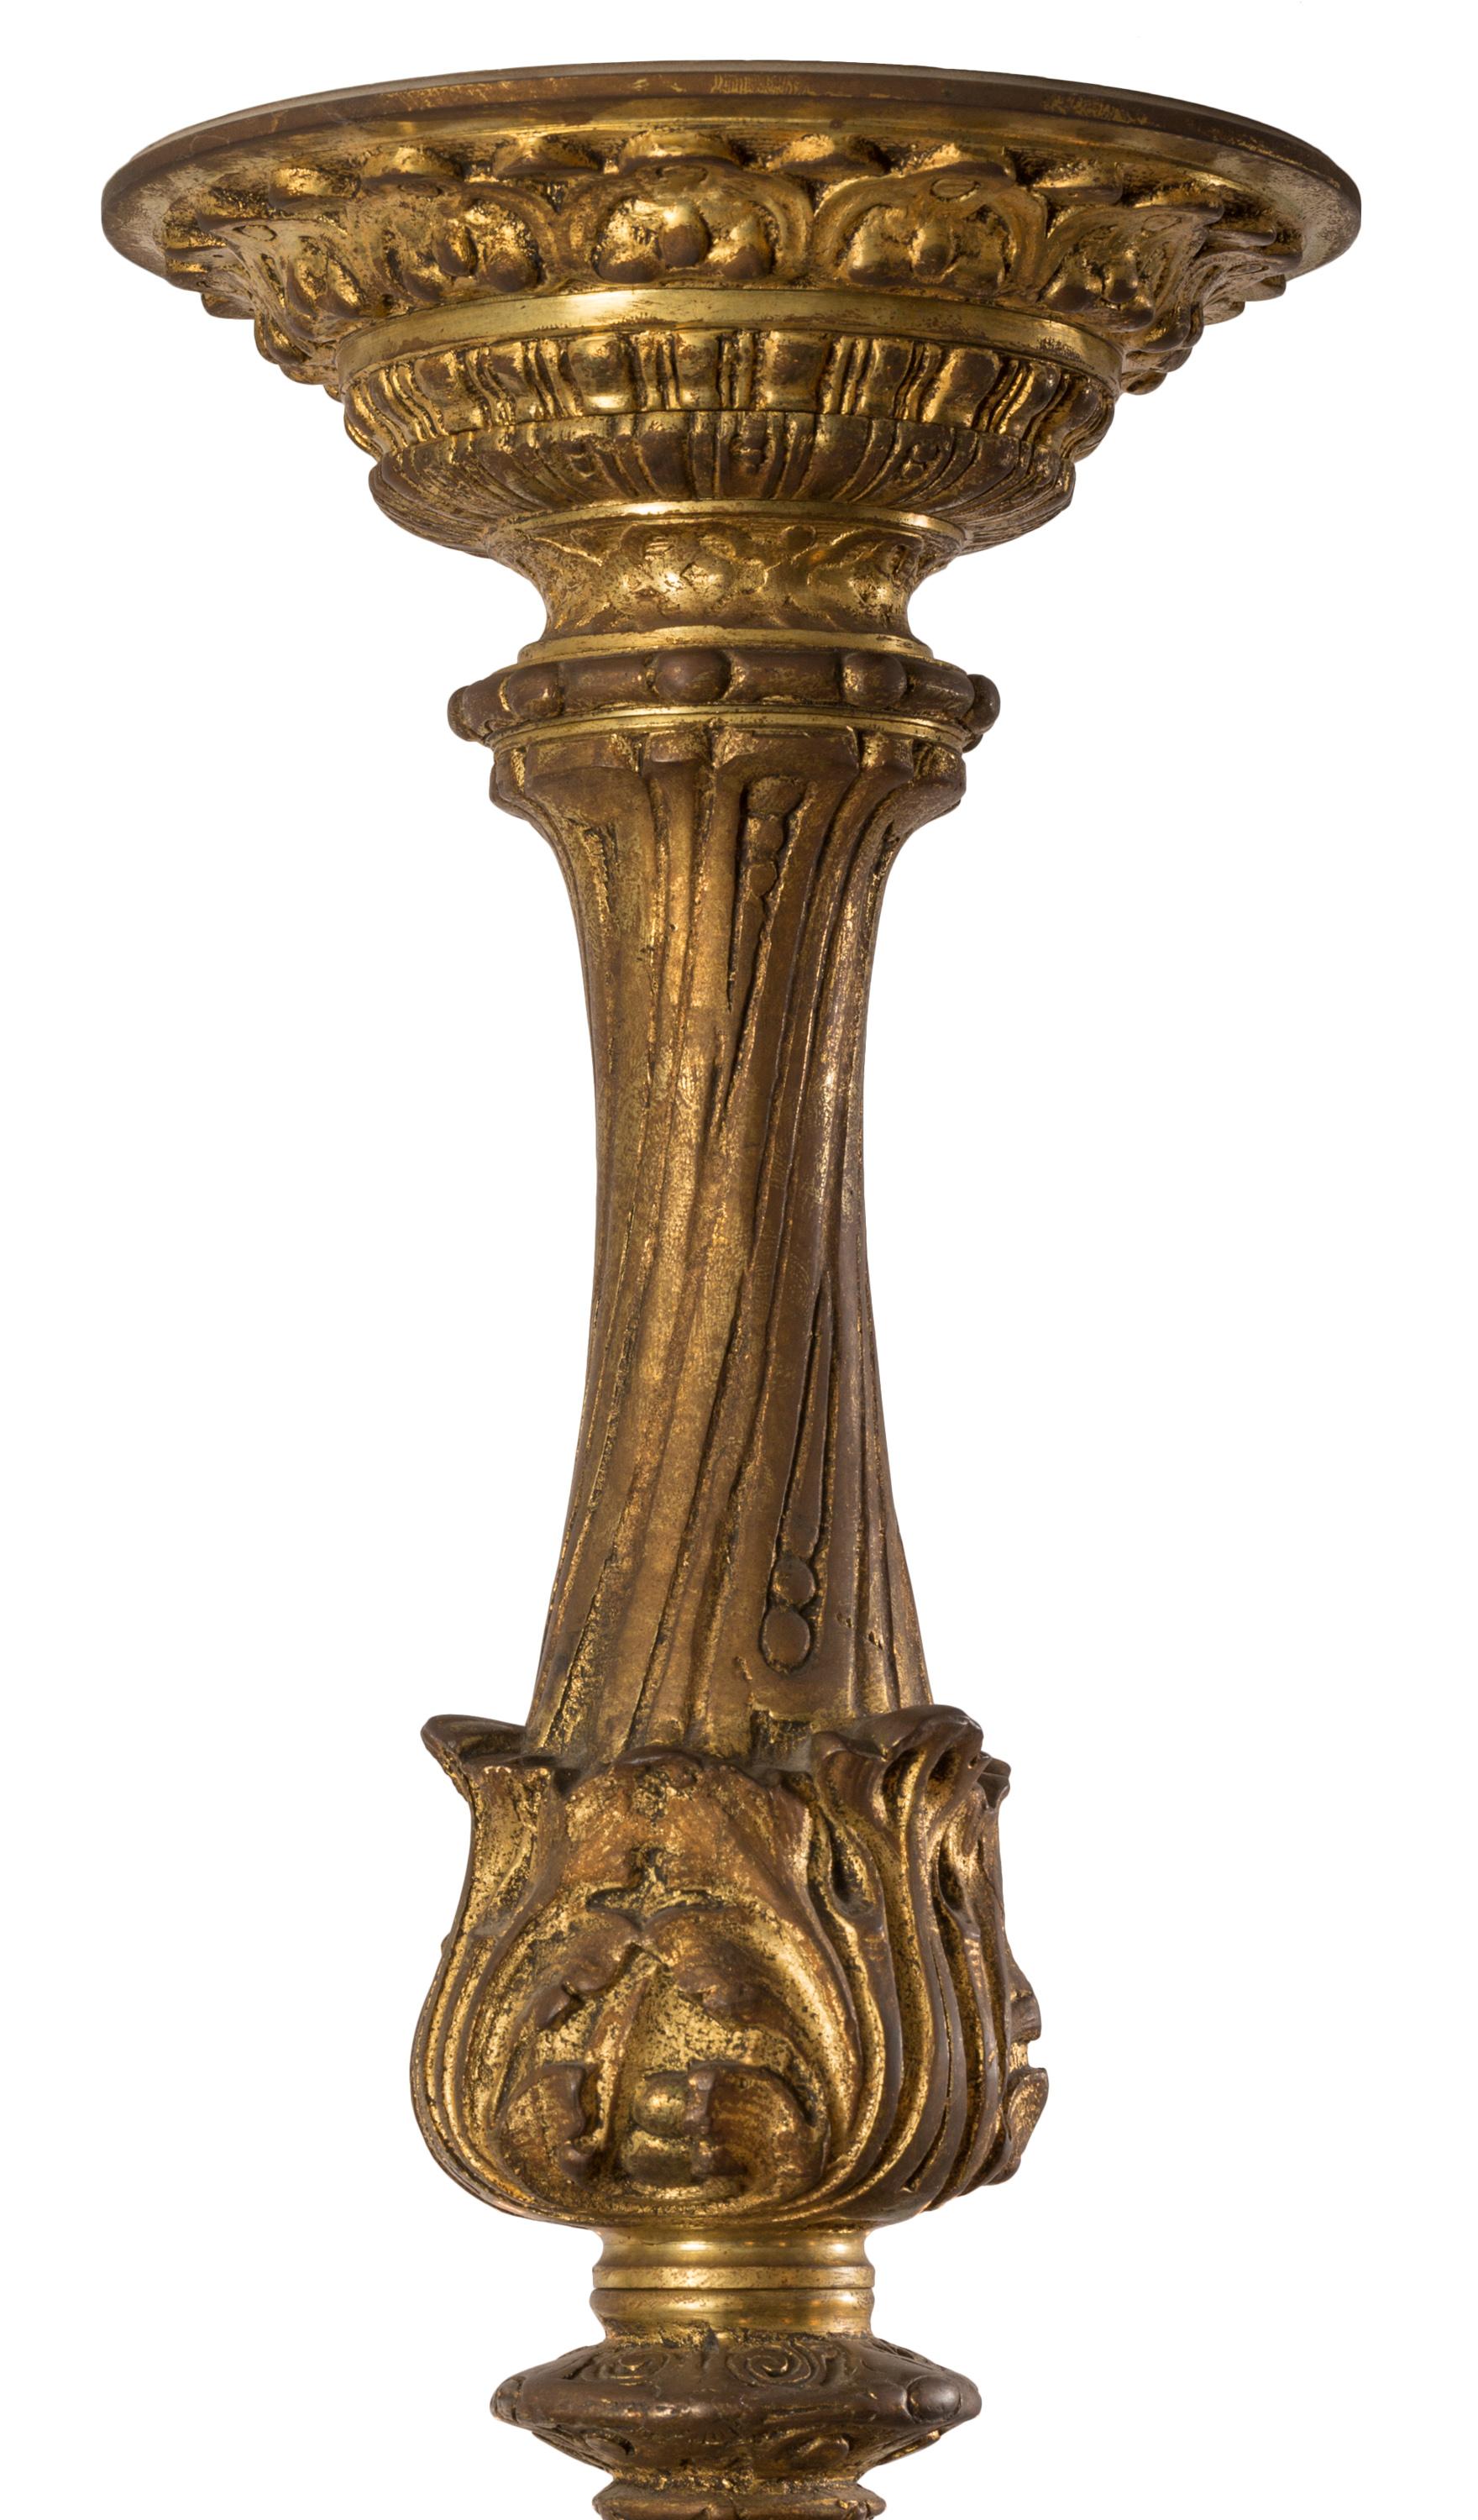 19th Century French Victorian Gilt Brass 12-Light Chandelier with Sculptural Green Man Motif For Sale